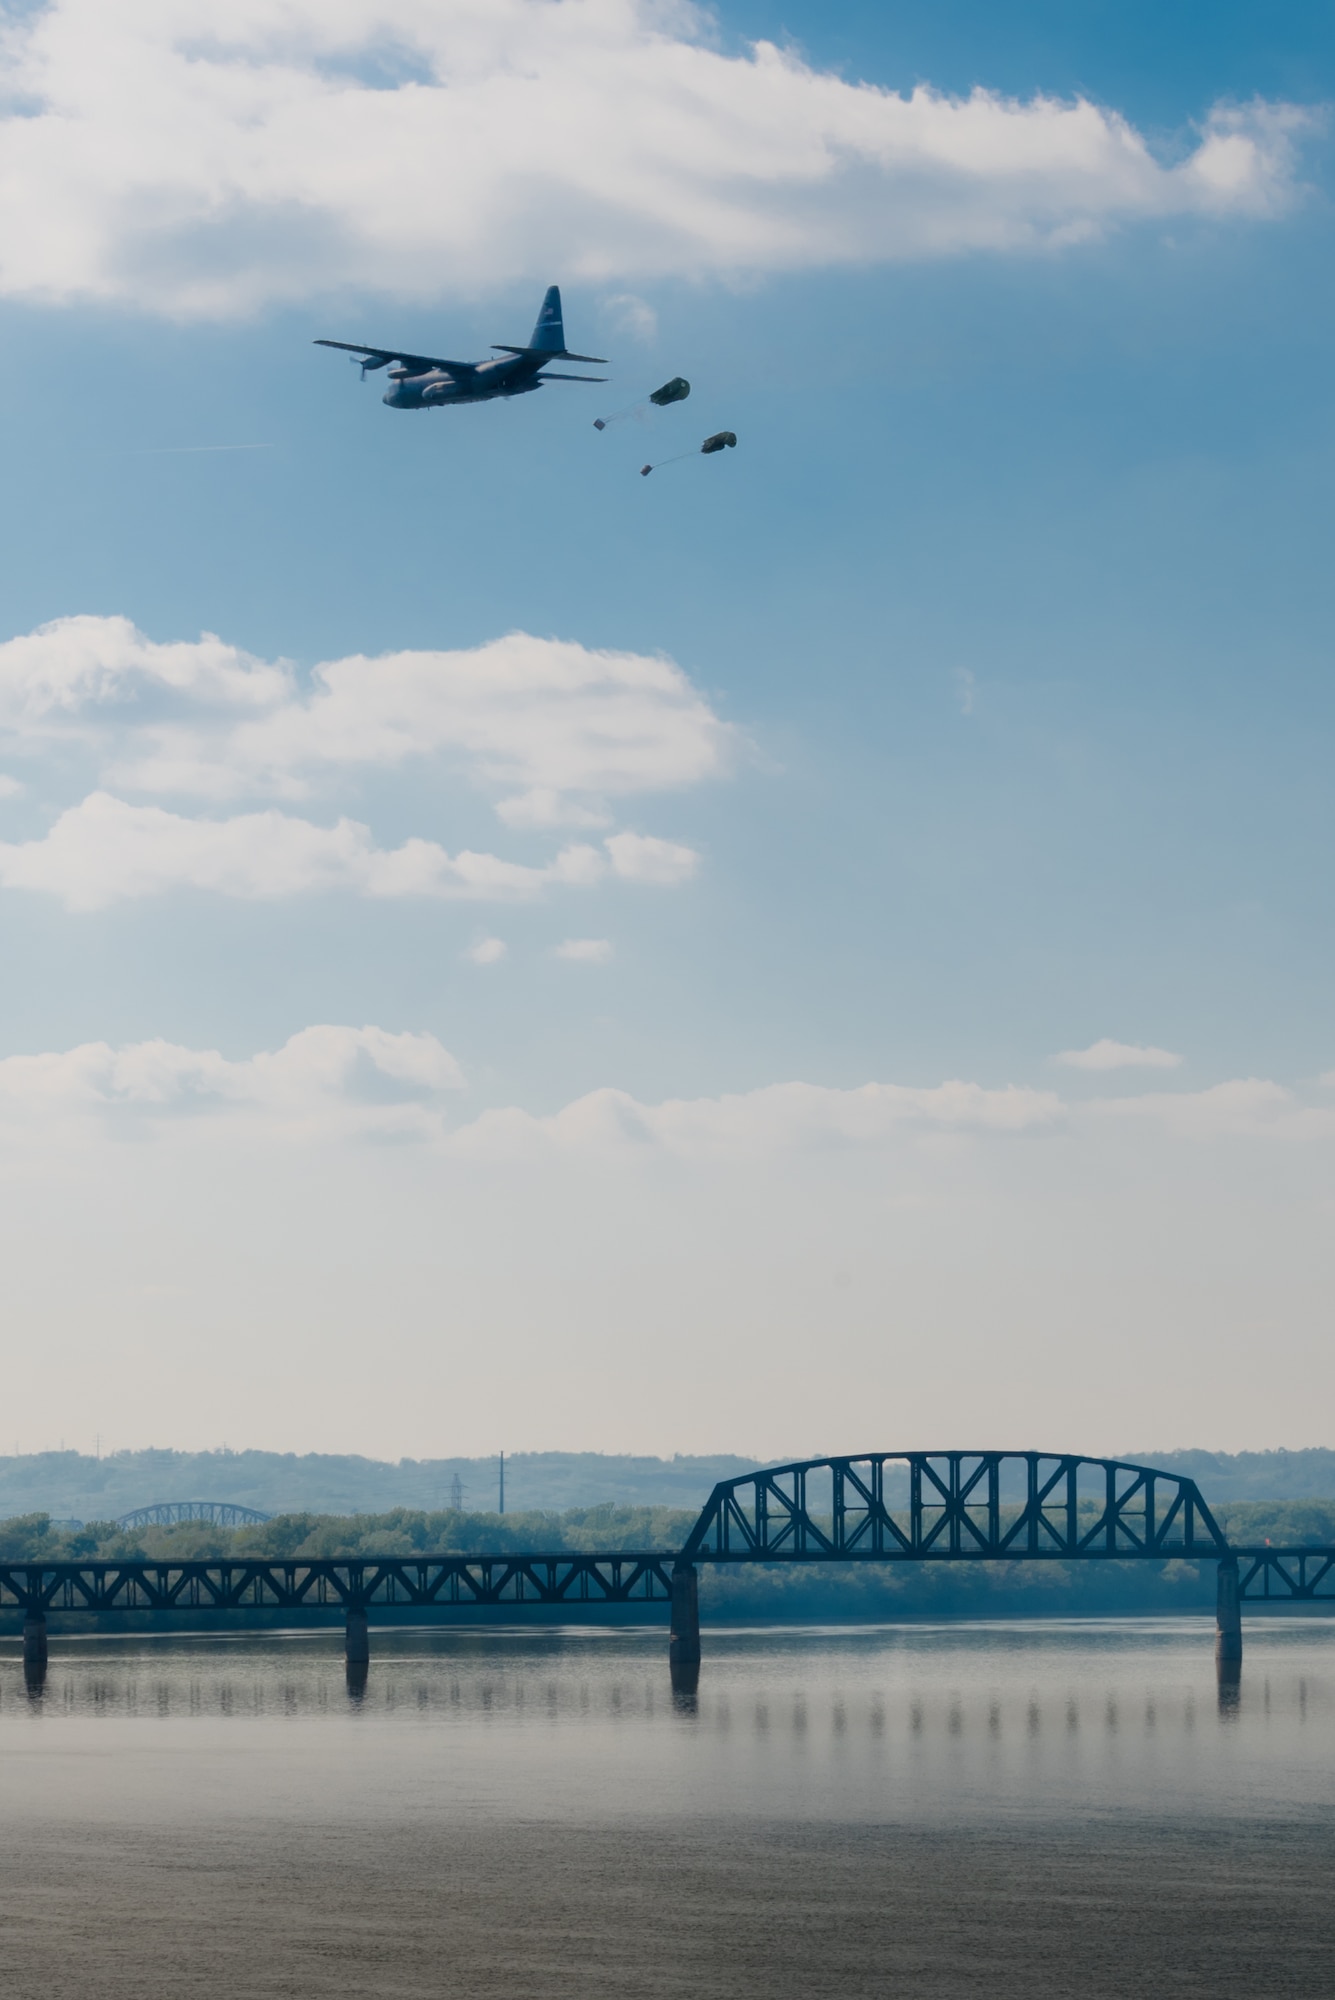 A Kentucky Air National Guard C-130 Hercules transport plane airdrops two bundles of cargo into the Ohio River during the Thunder Over Louisville air show in downtown Louisville, Ky., April 23, 2016. The event drew an estimated crowd of 725,000 spectators to the banks of the Ohio River. (U.S. Air National Guard photo by Maj. Dale Greer)